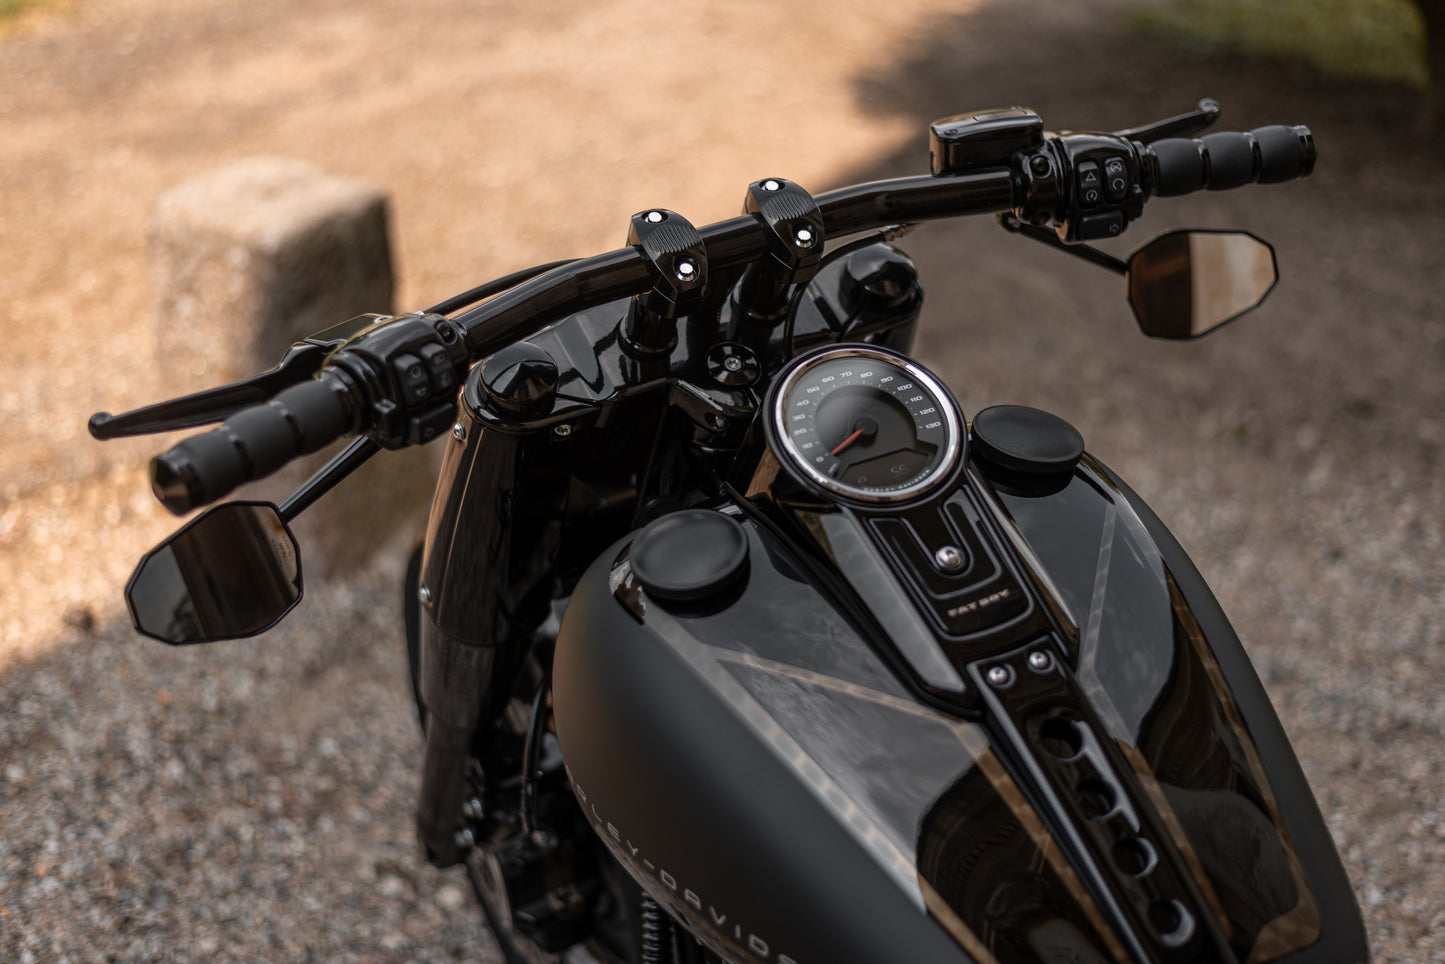 Zoomed Harley Davidson motorcycle with Killer Custom riser set for handlebar from above outside blurry background